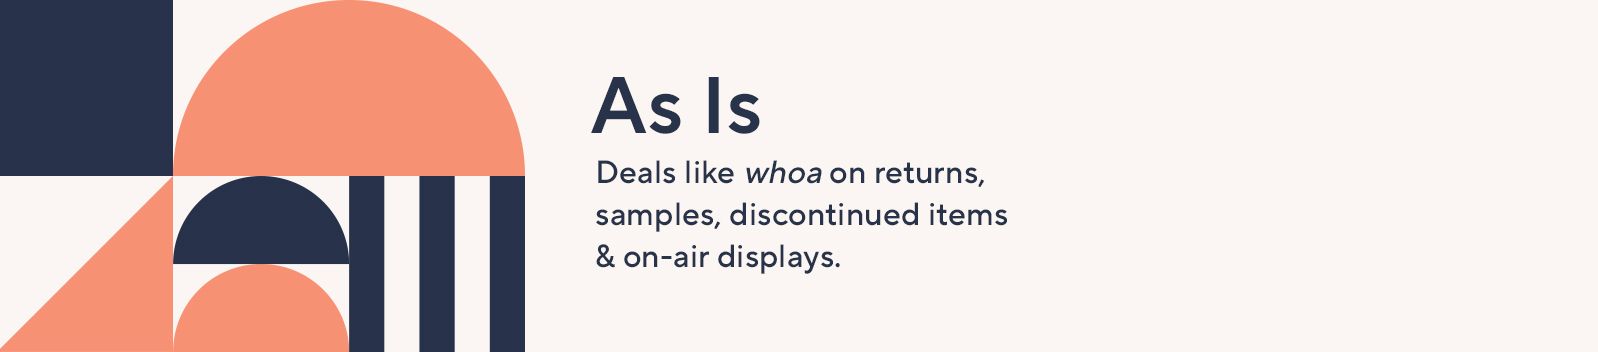 As Is. Deals like whoa on returns, samples, discontinued items & on-air displays